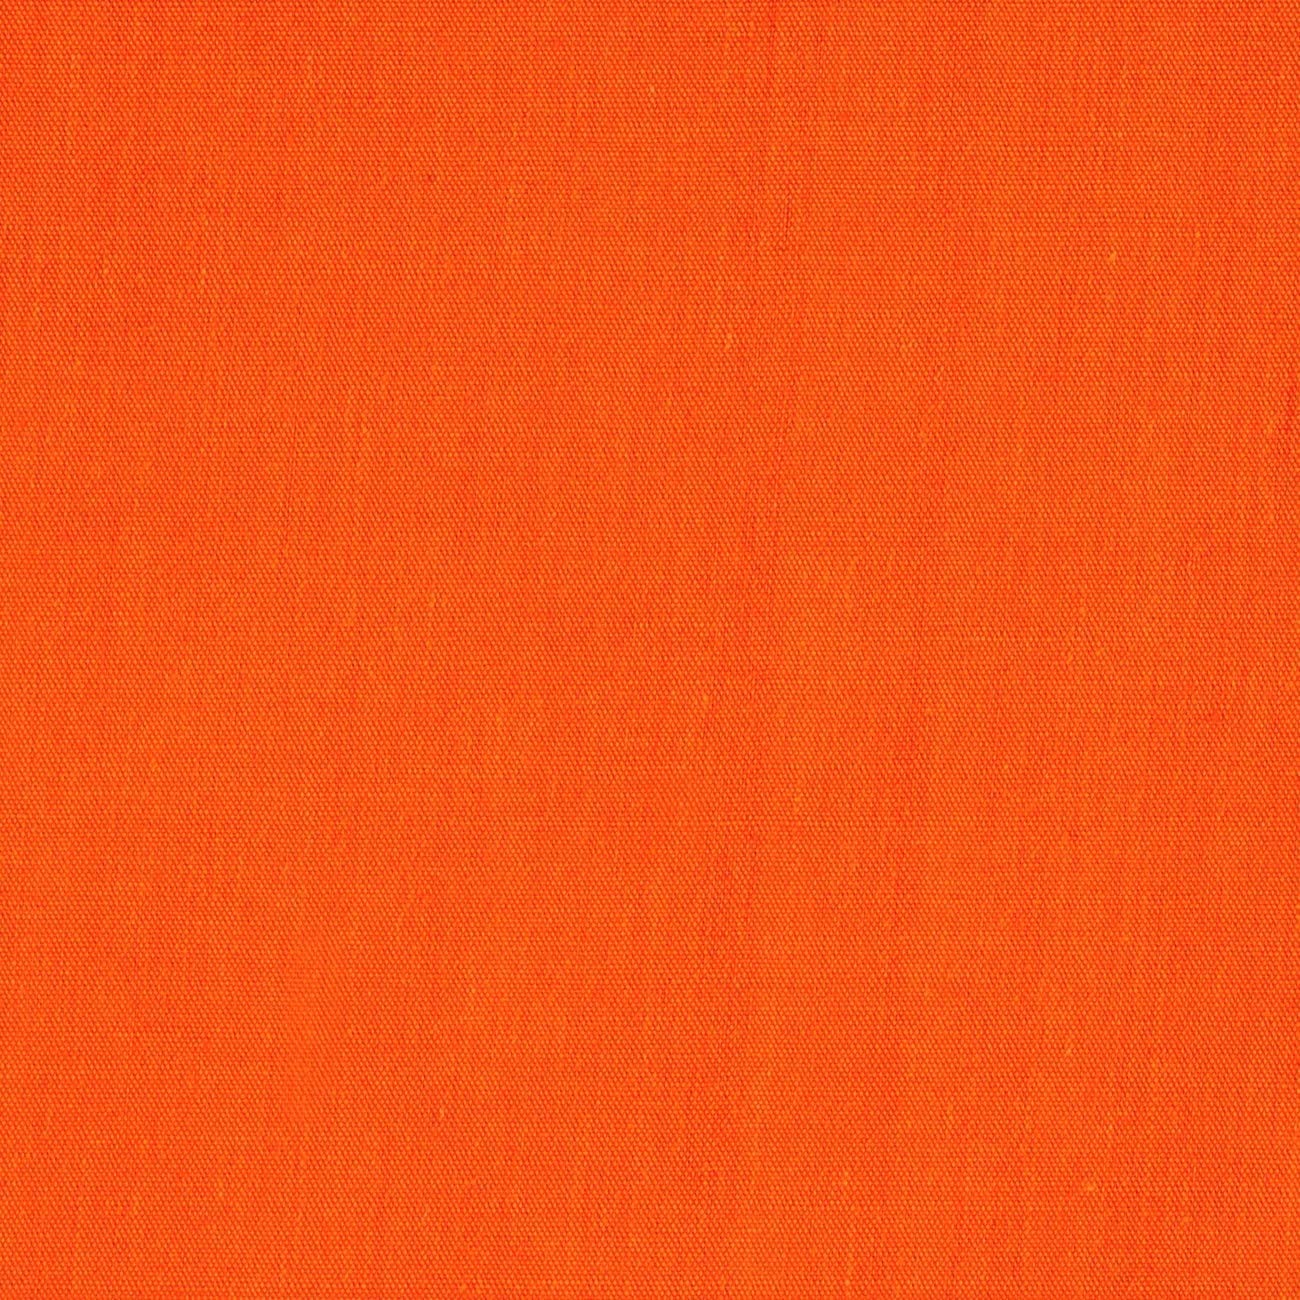 Premium Light Weight Poly Cotton Blend Broadcloth Fabric, Good to Make Face Mask Fabric (Orange, 1 Yard)